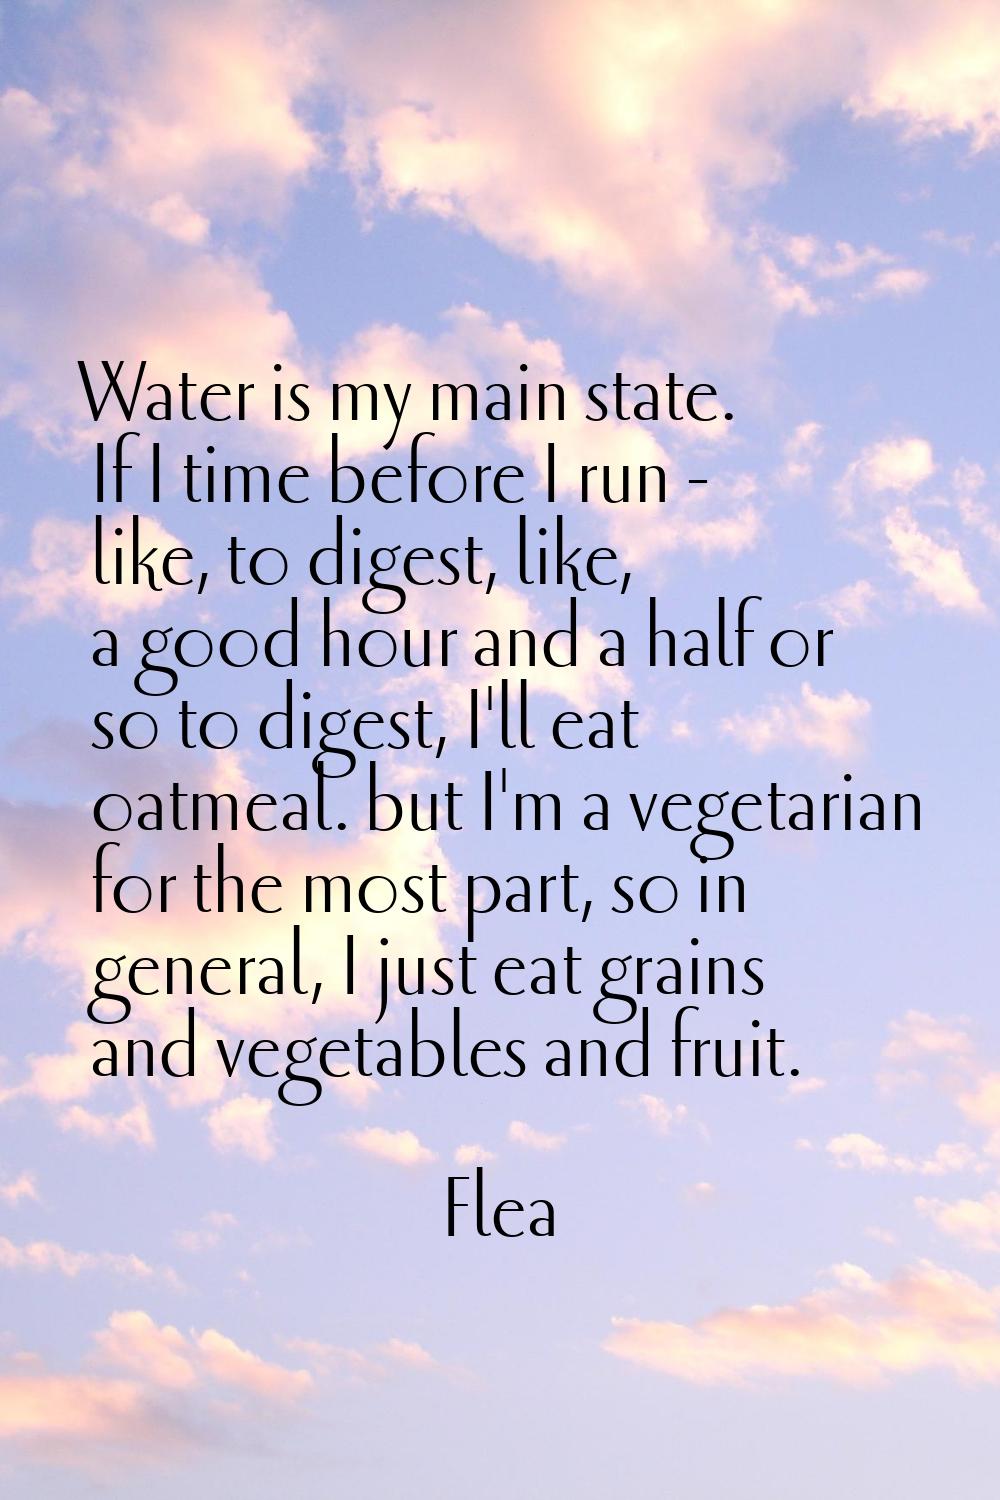 Water is my main state. If I time before I run - like, to digest, like, a good hour and a half or s